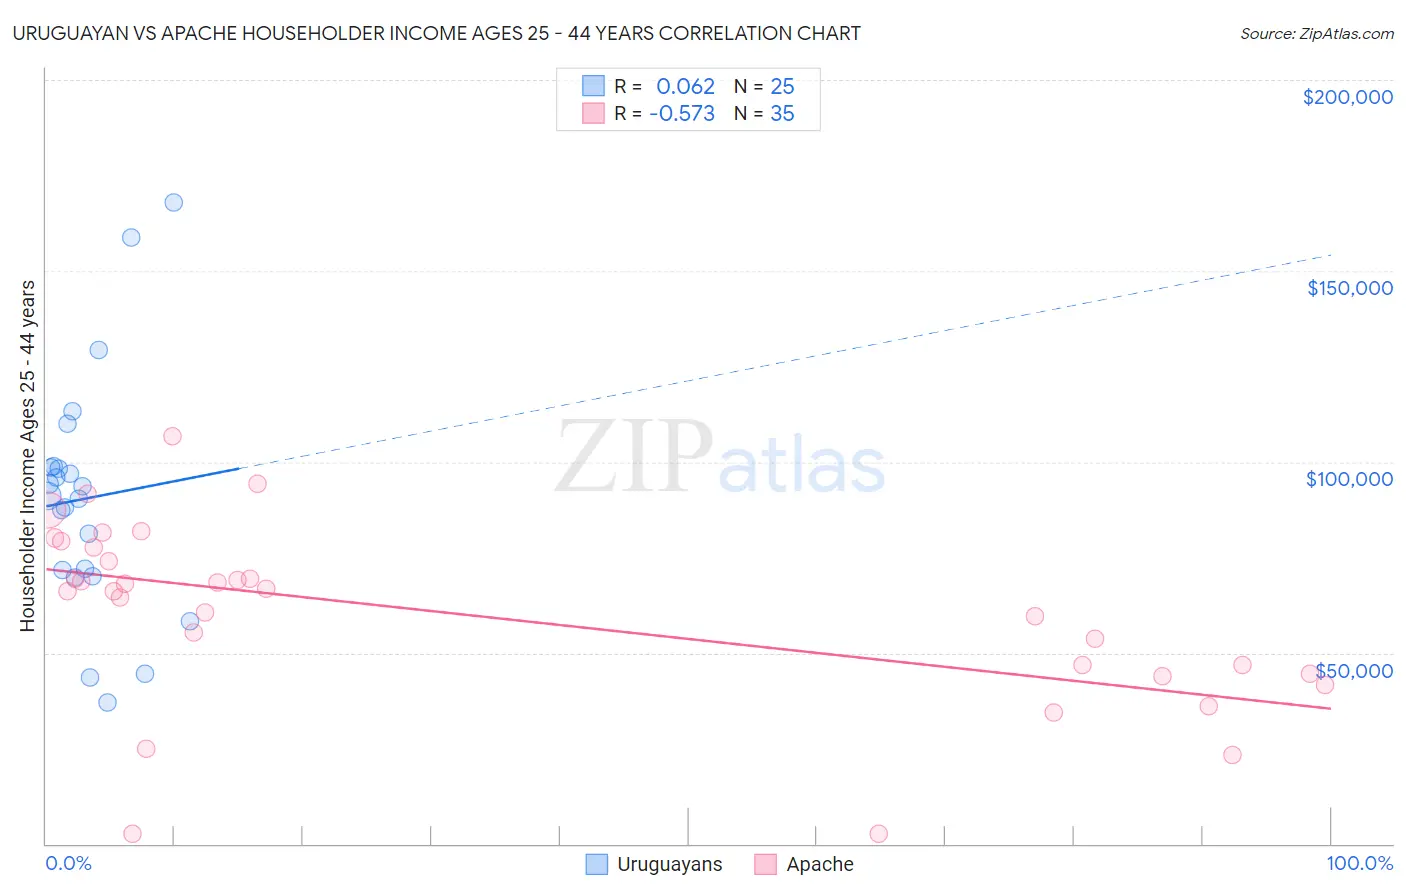 Uruguayan vs Apache Householder Income Ages 25 - 44 years